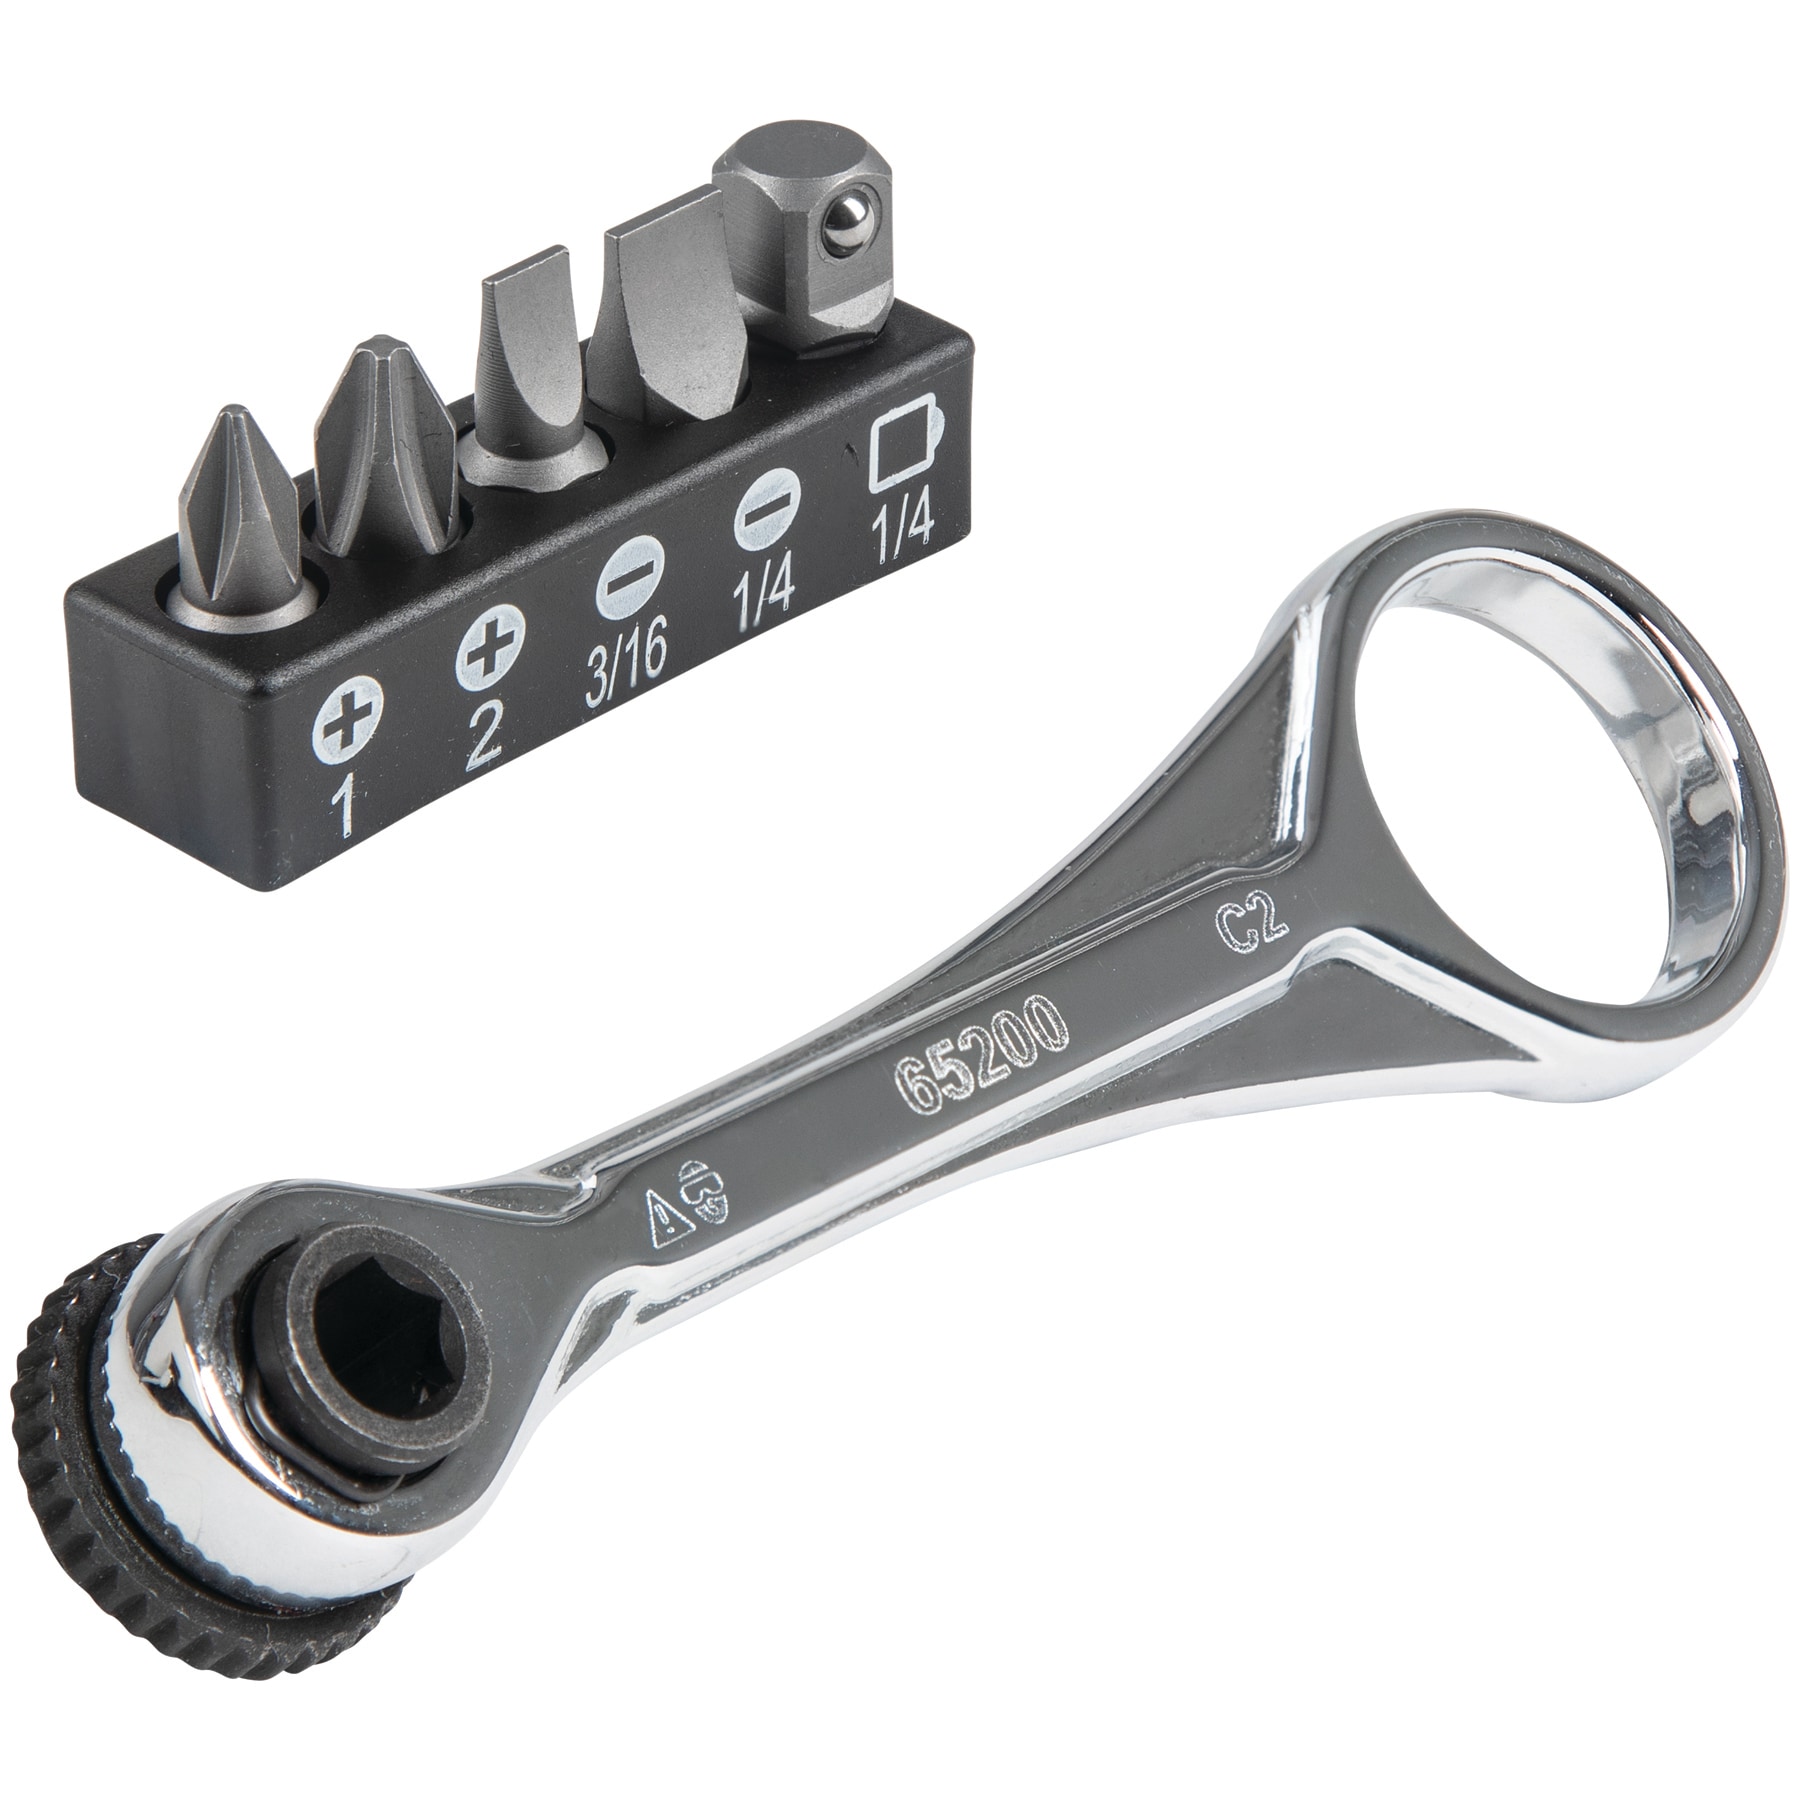 GEARWRENCH 1/4 in. Drive SAE Open End Interchangeable Torque